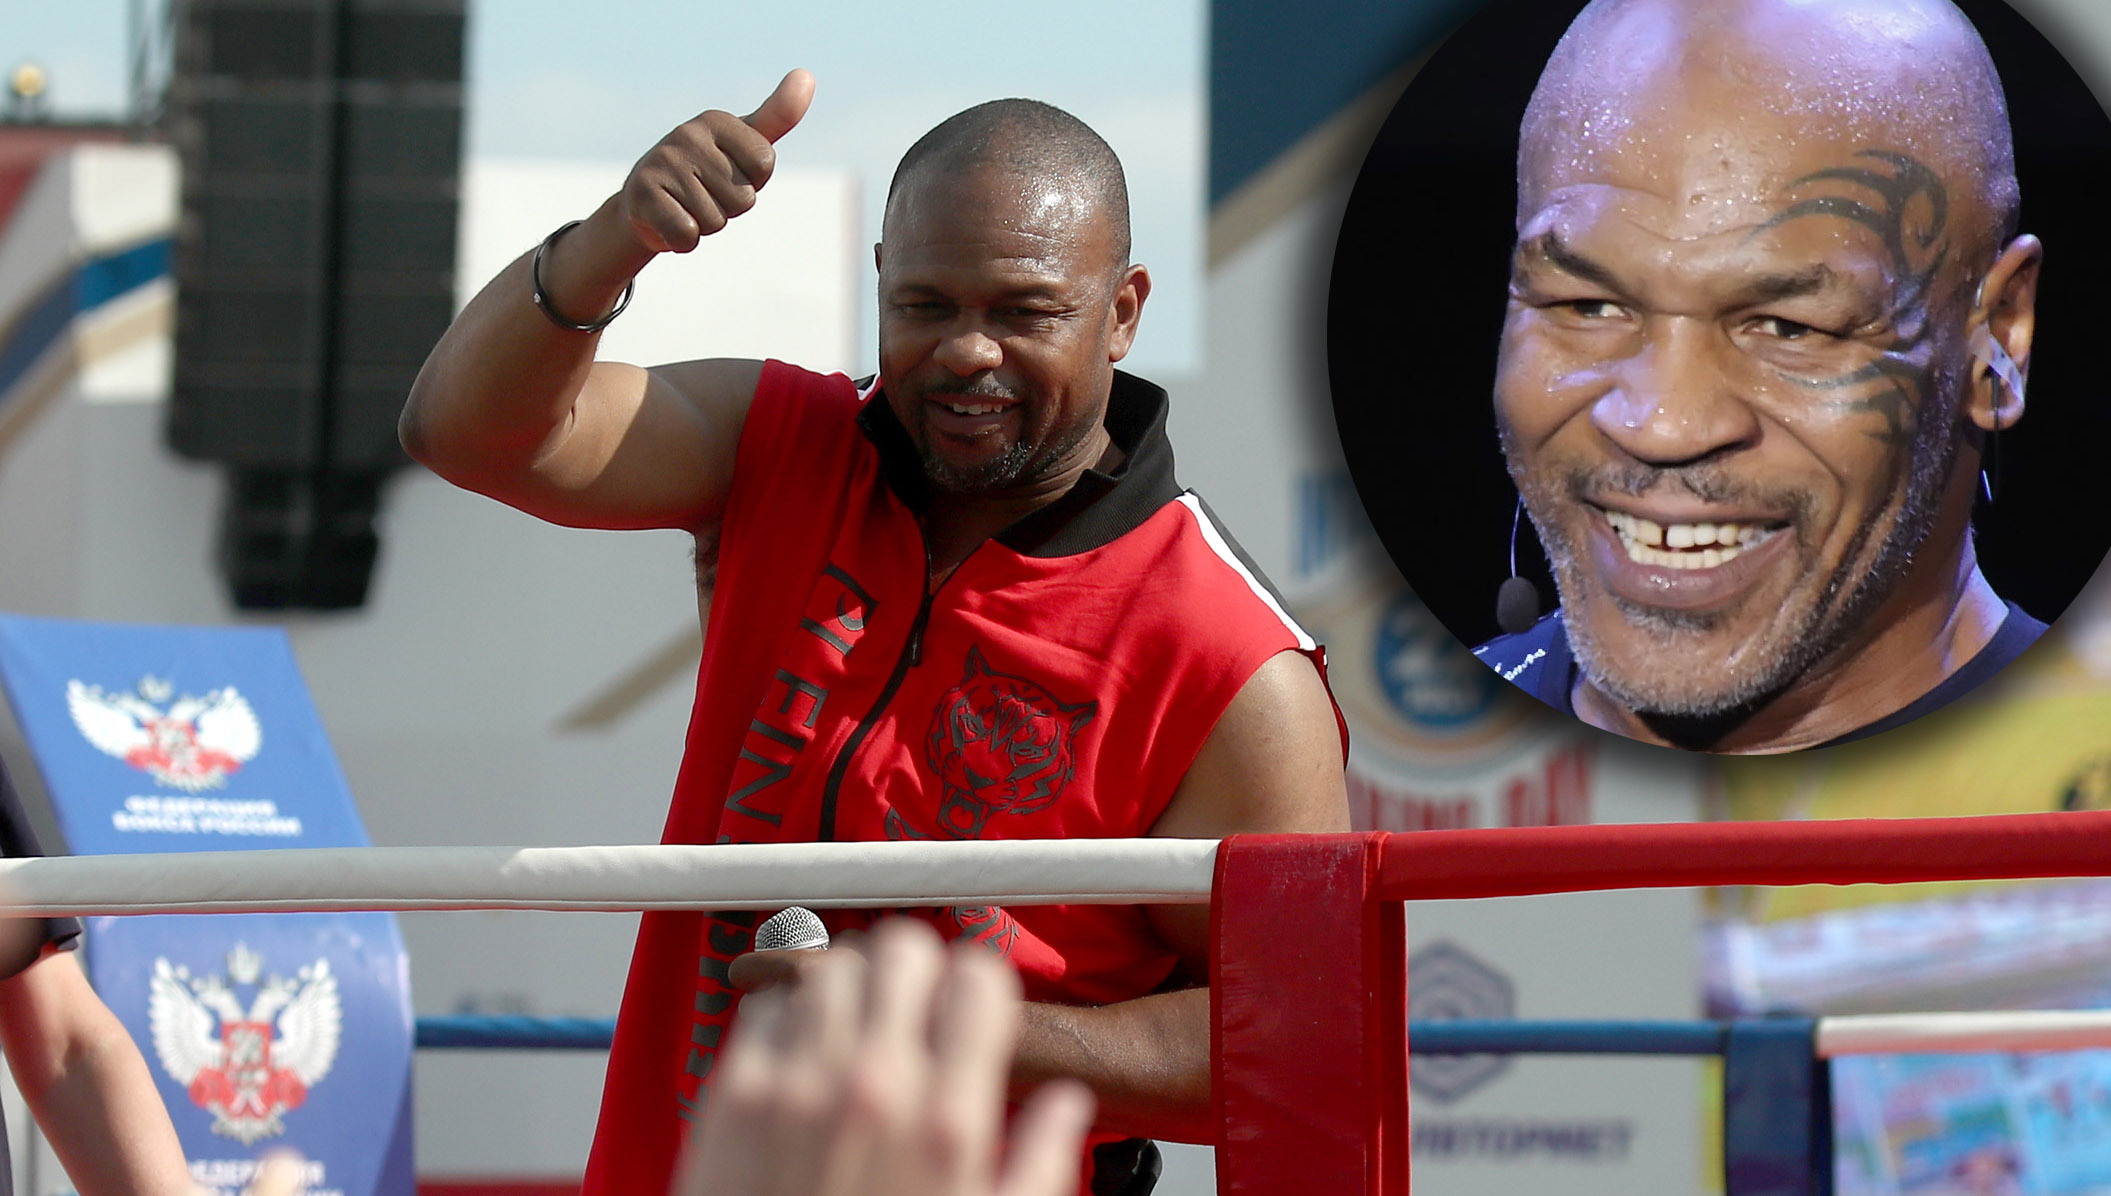 Roy Jones Tells Joe Rogan All The Rules In Upcoming Fight Are Slanted To  Favor Mike Tyson - BroBible